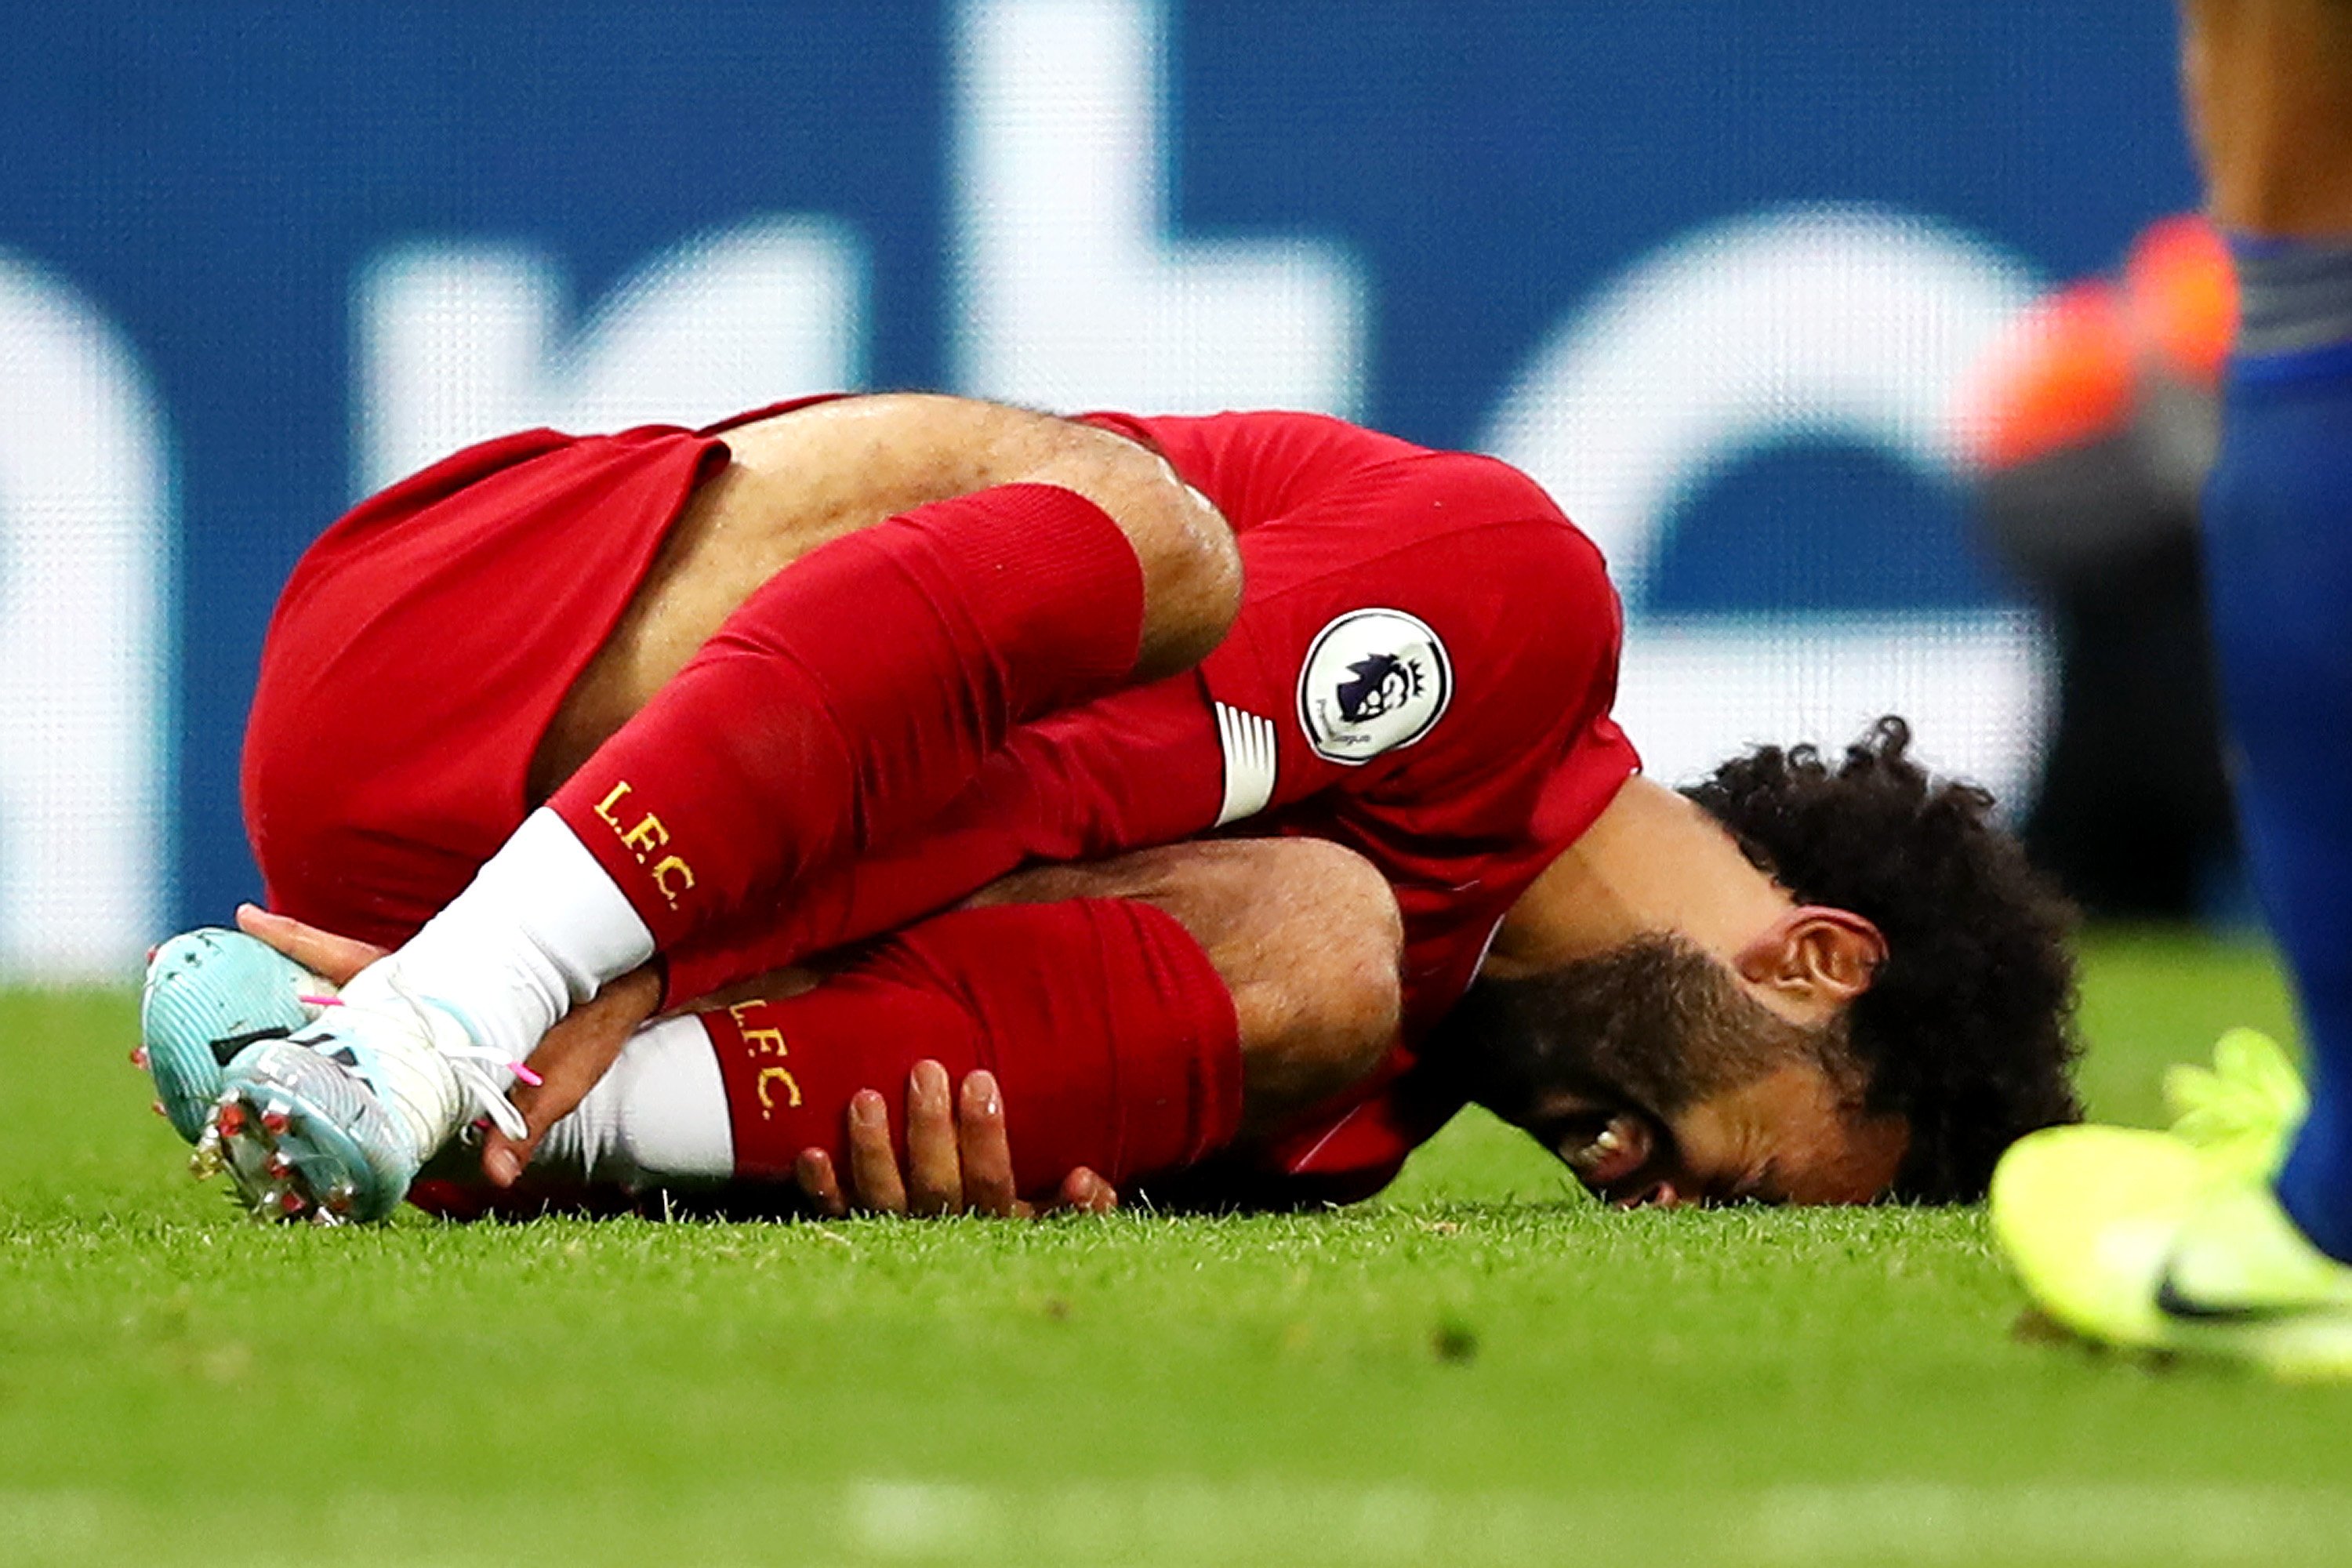 Liverpool provide injury update on Mohamed Salah after limping off against Leicester